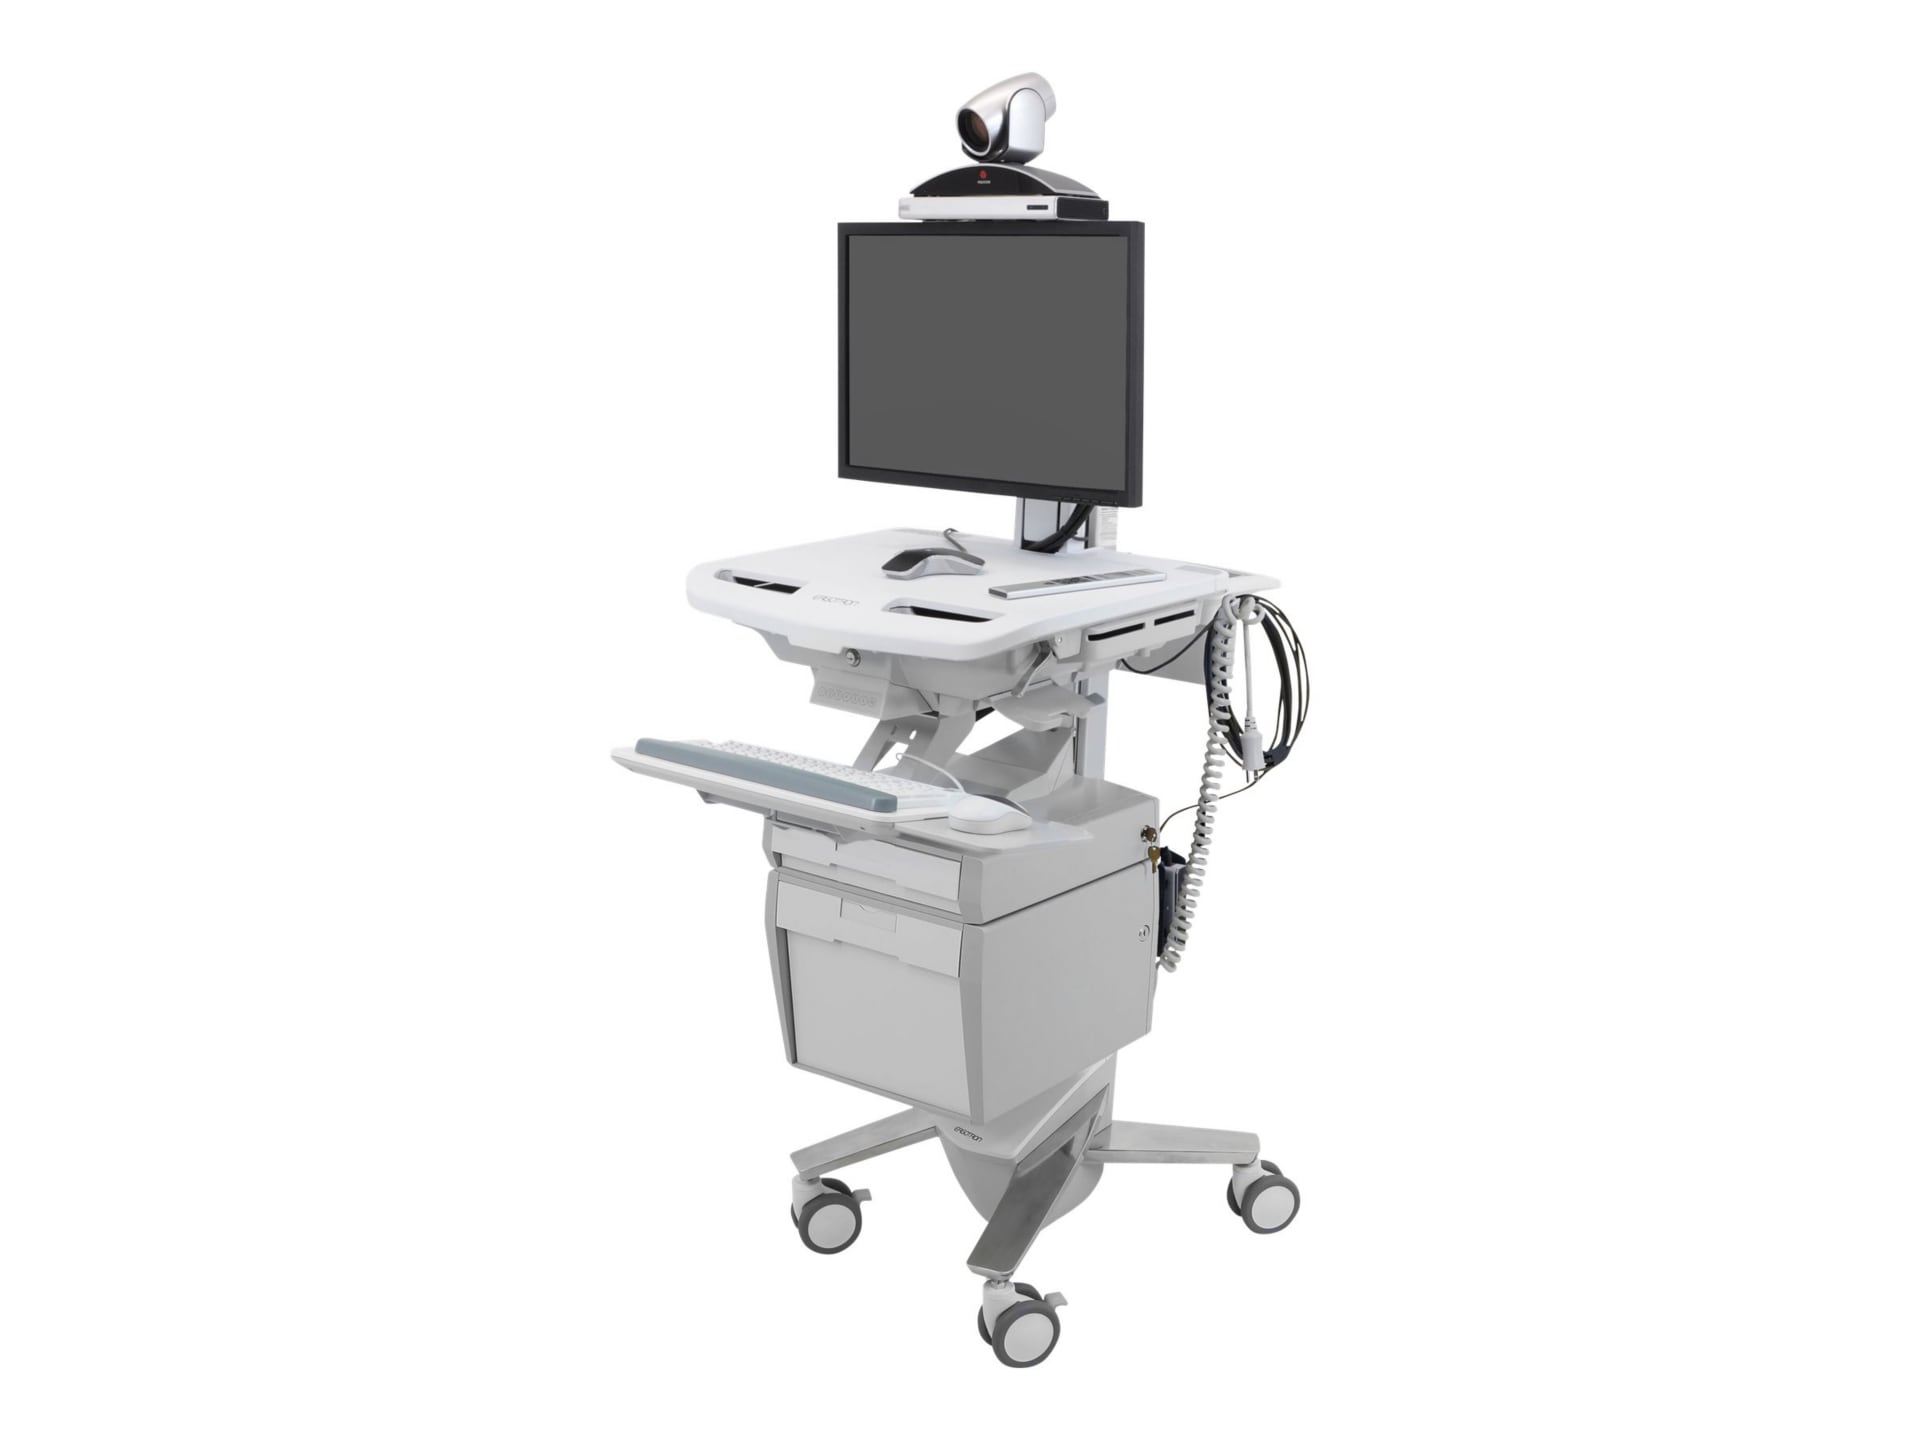 Ergotron StyleView Telepresence cart - open architecture - for LCD display